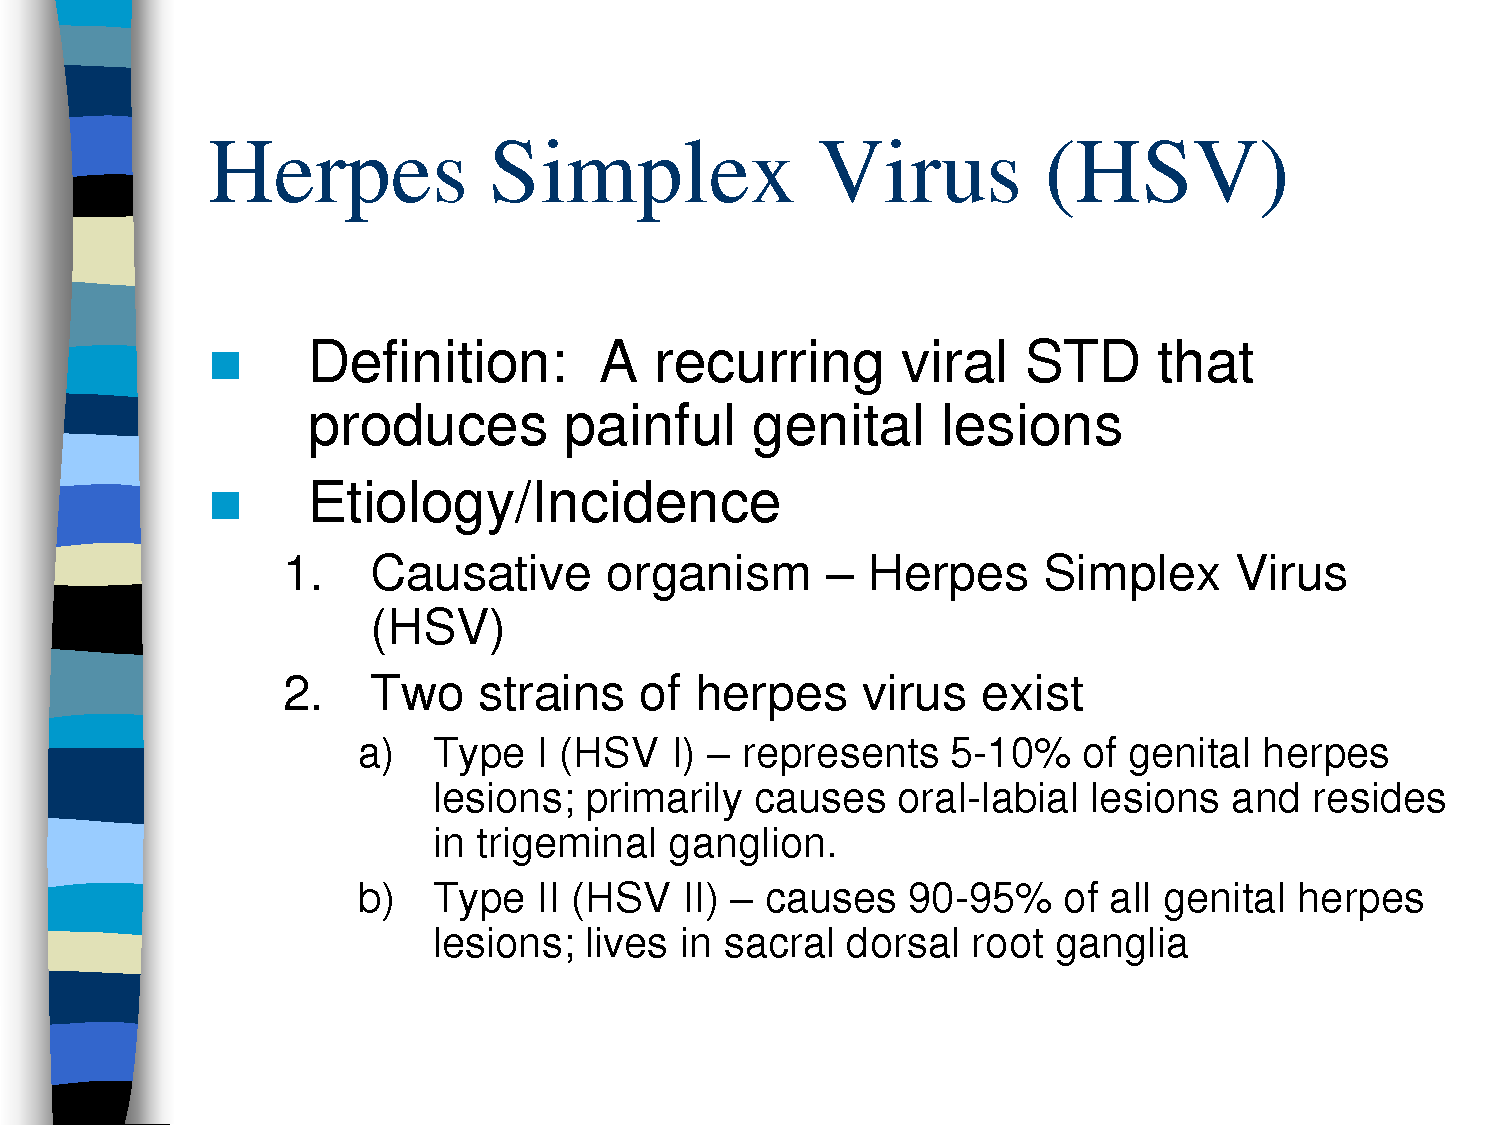 Herpes Simplex Virus Homeopathy medicines treatment specialist Dr.Senthil Kumar, Vivekanantha Homeopathy Clinic Chennai, velachery, Panruti, Pondichery, Tamilnadu, India, Herpes Simplex Viruses - HSV Herpes Viruses 1. Herpes simplex virus 1 (HSV-1) is the main cause of herpes infections that occur on the mouth and lips. These include cold sores and fever blisters. HSV-1 can also cause genital herpes. 2. Herpes simplex virus 2 (HSV-2) is the main cause of genital herpes. Alternative Names Genital herpes; Fever blisters; Cold sores; HSV-1; HSV-2 Genital Herpes Mode of Spread • Genital herpes is spread by sexual activity through skin to skin contact. The risk of infection is highest during outbreak periods when there are visible sores and lesions. However, genital herpes can also be transmitted when there are no visible symptoms. Most new cases of genital herpes infection do not cause symptoms, and many people infected with HSV-2 are unaware that they have genital herpes. • The herpes simplex virus passes through bodily fluids, such as saliva, semen, or fluid in the female genital tract or in fluid from a herpes sore. • The virus must have direct access to the uninfected person through their skin or mucous membranes, such as in the mouth or genital area. HSV Symptoms When genital herpes symptoms do appear, they are usually worse during the first outbreak than during recurring attacks. During an initial outbreak: Symptoms usually appear within 1 - 2 weeks after sexual exposure to the virus. The first signs are a tingling sensation in the affected areas, genitalia, buttocks, thighs, and groups of small red bumps that develop into blisters. Over the next 2 - 3 weeks, more blisters can appear and rupture into painful open sores. The lesions eventually dry out and develop a crust, and then heal rapidly without leaving a scar. About 40% of men and 70% of women develop flu-like symptoms during initial outbreaks of genital herpes, such as headache, muscle aches, fever, and swollen glands. Symptoms of Genital Herpes Primary Genital Herpes Outbreak. • For patients with symptoms, the first outbreak usually occurs in or around the genital area 1 - 2 weeks after sexual exposure to the virus. • The first signs are a tingling sensation in the affected areas (such as genitalia, buttocks, and thighs) and groups of small red bumps that develop into blisters. Over the next 2 - 3 weeks, more blisters can appear and rupture into painful open sores. • The lesions eventually dry out, develop a crust, and heal rapidly without leaving a scar. Blisters in moist areas heal more slowly than others. The lesions may sometimes itch, but itching decreases as they heal. Recurrent Genital Herpes Outbreak. • In general, recurrences are much milder than the initial outbreak. • The virus sheds for a much shorter period of time (about 3 days) compared to in an initial outbreak of 3 weeks. Women may have only minor itching, and the symptoms may be even milder in men. Symptoms of Oral Herpes Oral herpes most often caused by herpes simplex virus 1 (HSV-1) but can also be caused by herpes simplex virus 2 (HSV-2). It usually affects the lips and, in some primary attacks, the mucous membranes in the mouth. A herpes infection may occur on the cheeks or in the nose, but facial herpes is very uncommon. Primary Oral Herpes Infection. • Initial oral infection causes symptoms, they can be very painful, particularly in small children. • Blisters form on the lips but may also erupt on the tongue. • The blisters eventually rupture as painful open sores, develop a yellowish membrane before healing, and disappear within 3 - 14 days. • Increased salivation and bad breath may be present. • Rarely, the infection may be accompanied by difficulty in swallowing, chills, muscle pain, or hearing loss. • In children, the infection usually occurs in the mouth. In adolescents, the primary infection is more apt to appear in the upper part of the throat and cause soreness. Recurrent Oral Herpes Infection. • Most patients have only a couple of outbreaks a year, although a small percentage of patients have more frequent recurrences. HSV-2 oral infections tend to recur less frequently than HSV-1. • Recurrences are usually much milder than primary infections and are known commonly as cold sores or fever blisters, because they may arise during a bout of cold or flu. • They usually show up on the outer edge of the lips and rarely affect the gums or throat. Cold sores are commonly mistaken for the crater-like mouth lesions known as canker sores, which are not associated with herpes simplex virus. How to prevent genital herpes transmission:  Use a latex condom for sexual intercourse  Use a dental dam for oral sex  Limit your number of sexual partners  Be aware that chemical spermicide used in gel and foam contraceptive products and some lubricated condoms, does not protect against any sexually transmitted diseases. Treatment In modern medicines most of the doctors prescribing Anti Viral drugs daily for long time, Regular usage of Anti Viral drugs may develop some side effects and complications, Homeopathy treatment for herpes Simplex Virus Symptomatic Homeopathy medicines helps to increase immunity and gives better result for Oral and Genital recurrent herpes. Whom to contact for Herpes Simplex Virus Treatment Dr.Senthil Kumar Treats many cases of Herpes Simplex Virus, In his medical professional experience with successful results. Many patients get relief after taking treatment from Dr.Senthil Kumar. Dr.Senthil Kumar visits Chennai at Vivekanantha Homeopathy Clinic, Velachery, Chennai 42. To get appointment please call 9786901830, +91 94430 54168 or mail to consult.ur.dr@gmail.com, For more details & Consultation Feel free to contact us. Vivekanantha Clinic Consultation Champers at Chennai:- 9786901830 Panruti:- 9443054168 Pondicherry:- 9865212055 (Camp) Mail : consult.ur.dr@gmail.com, homoeokumar@gmail.com For appointment please Call us or Mail Us For appointment: SMS your Name -Age – Mobile Number - Problem in Single word - date and day - Place of appointment (Eg: Rajini - 99xxxxxxx0 – HSV – 21st Oct, Sunday - Chennai ), You will receive Appointment details through SMS